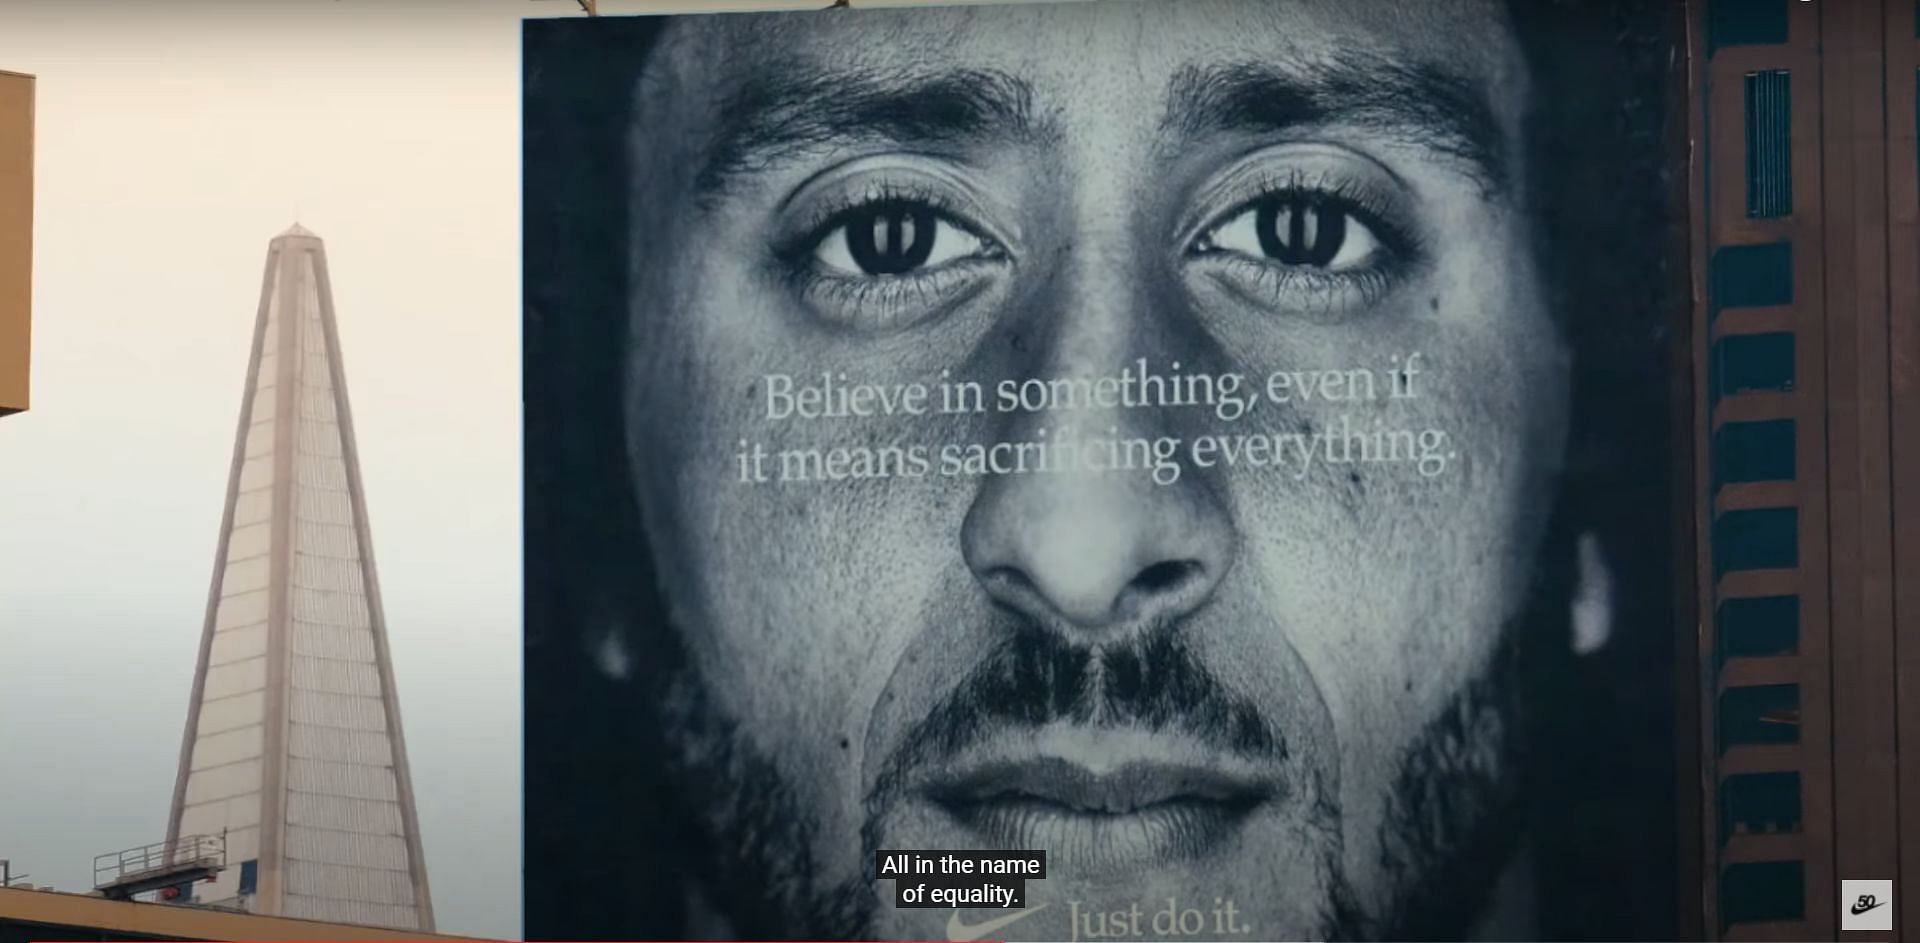 WATCH: Kaepernick features in Nike commercial